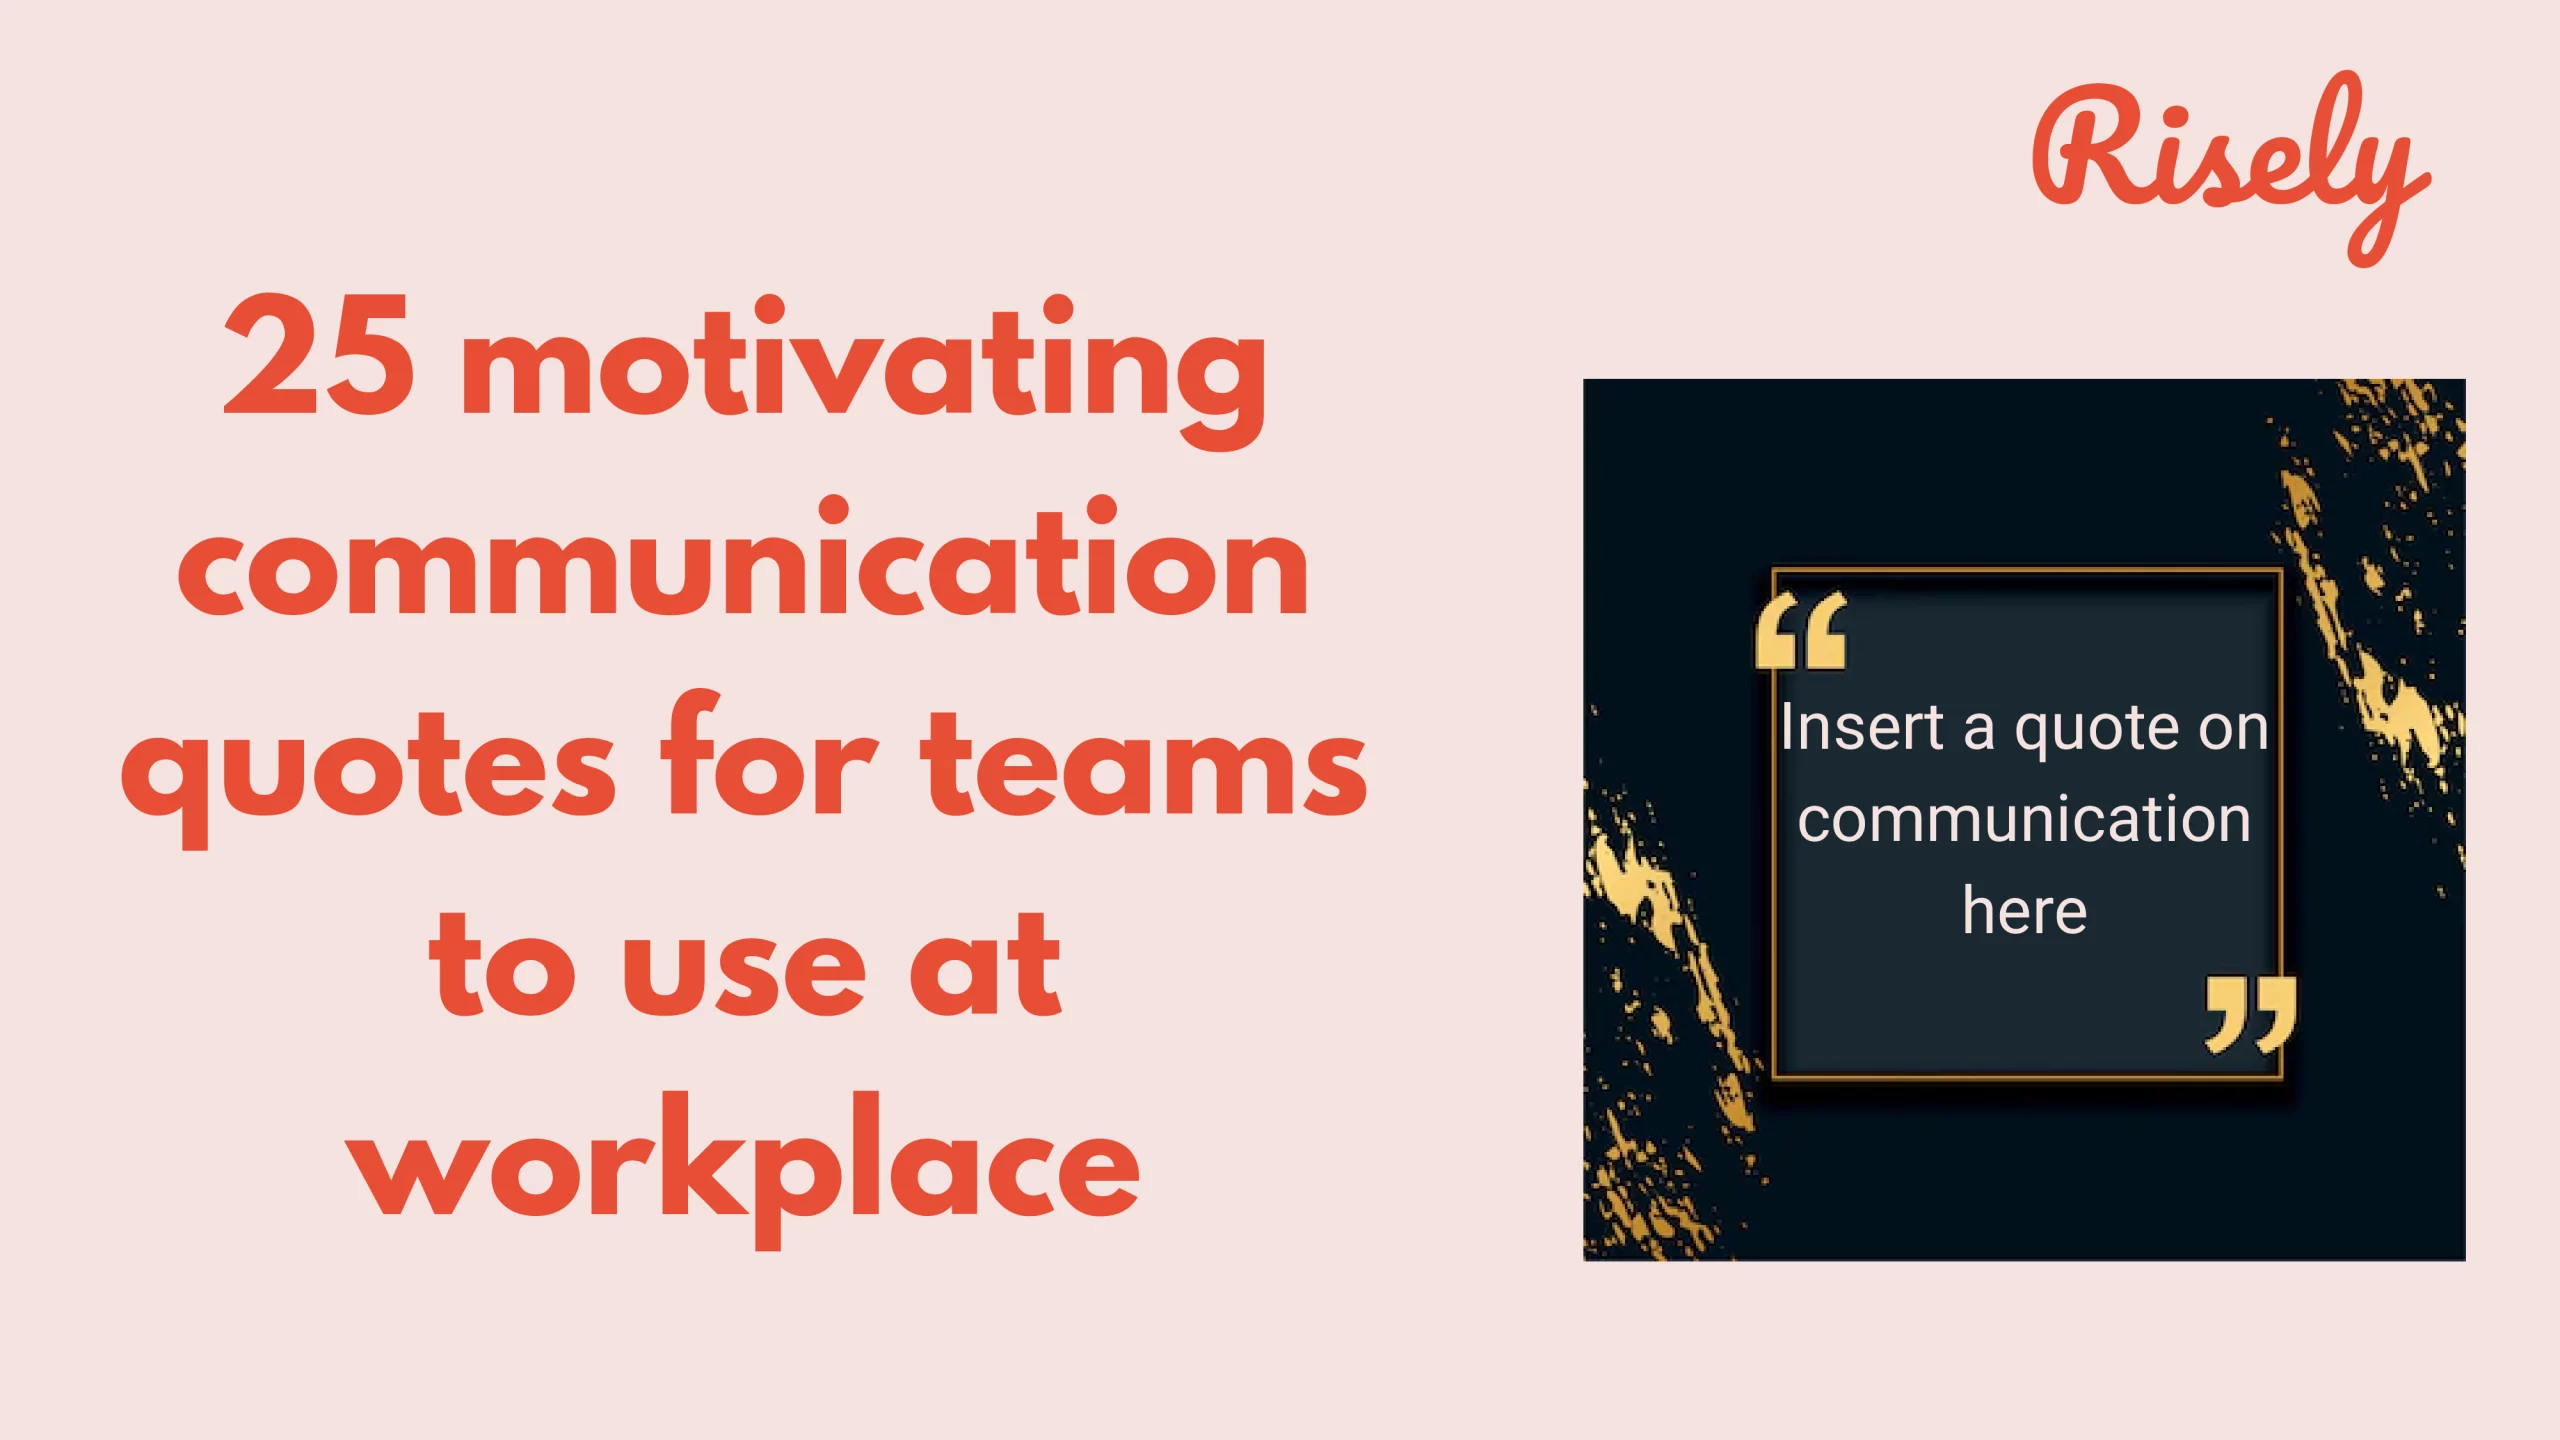 25 motivating communication quotes for teams to use at workplace